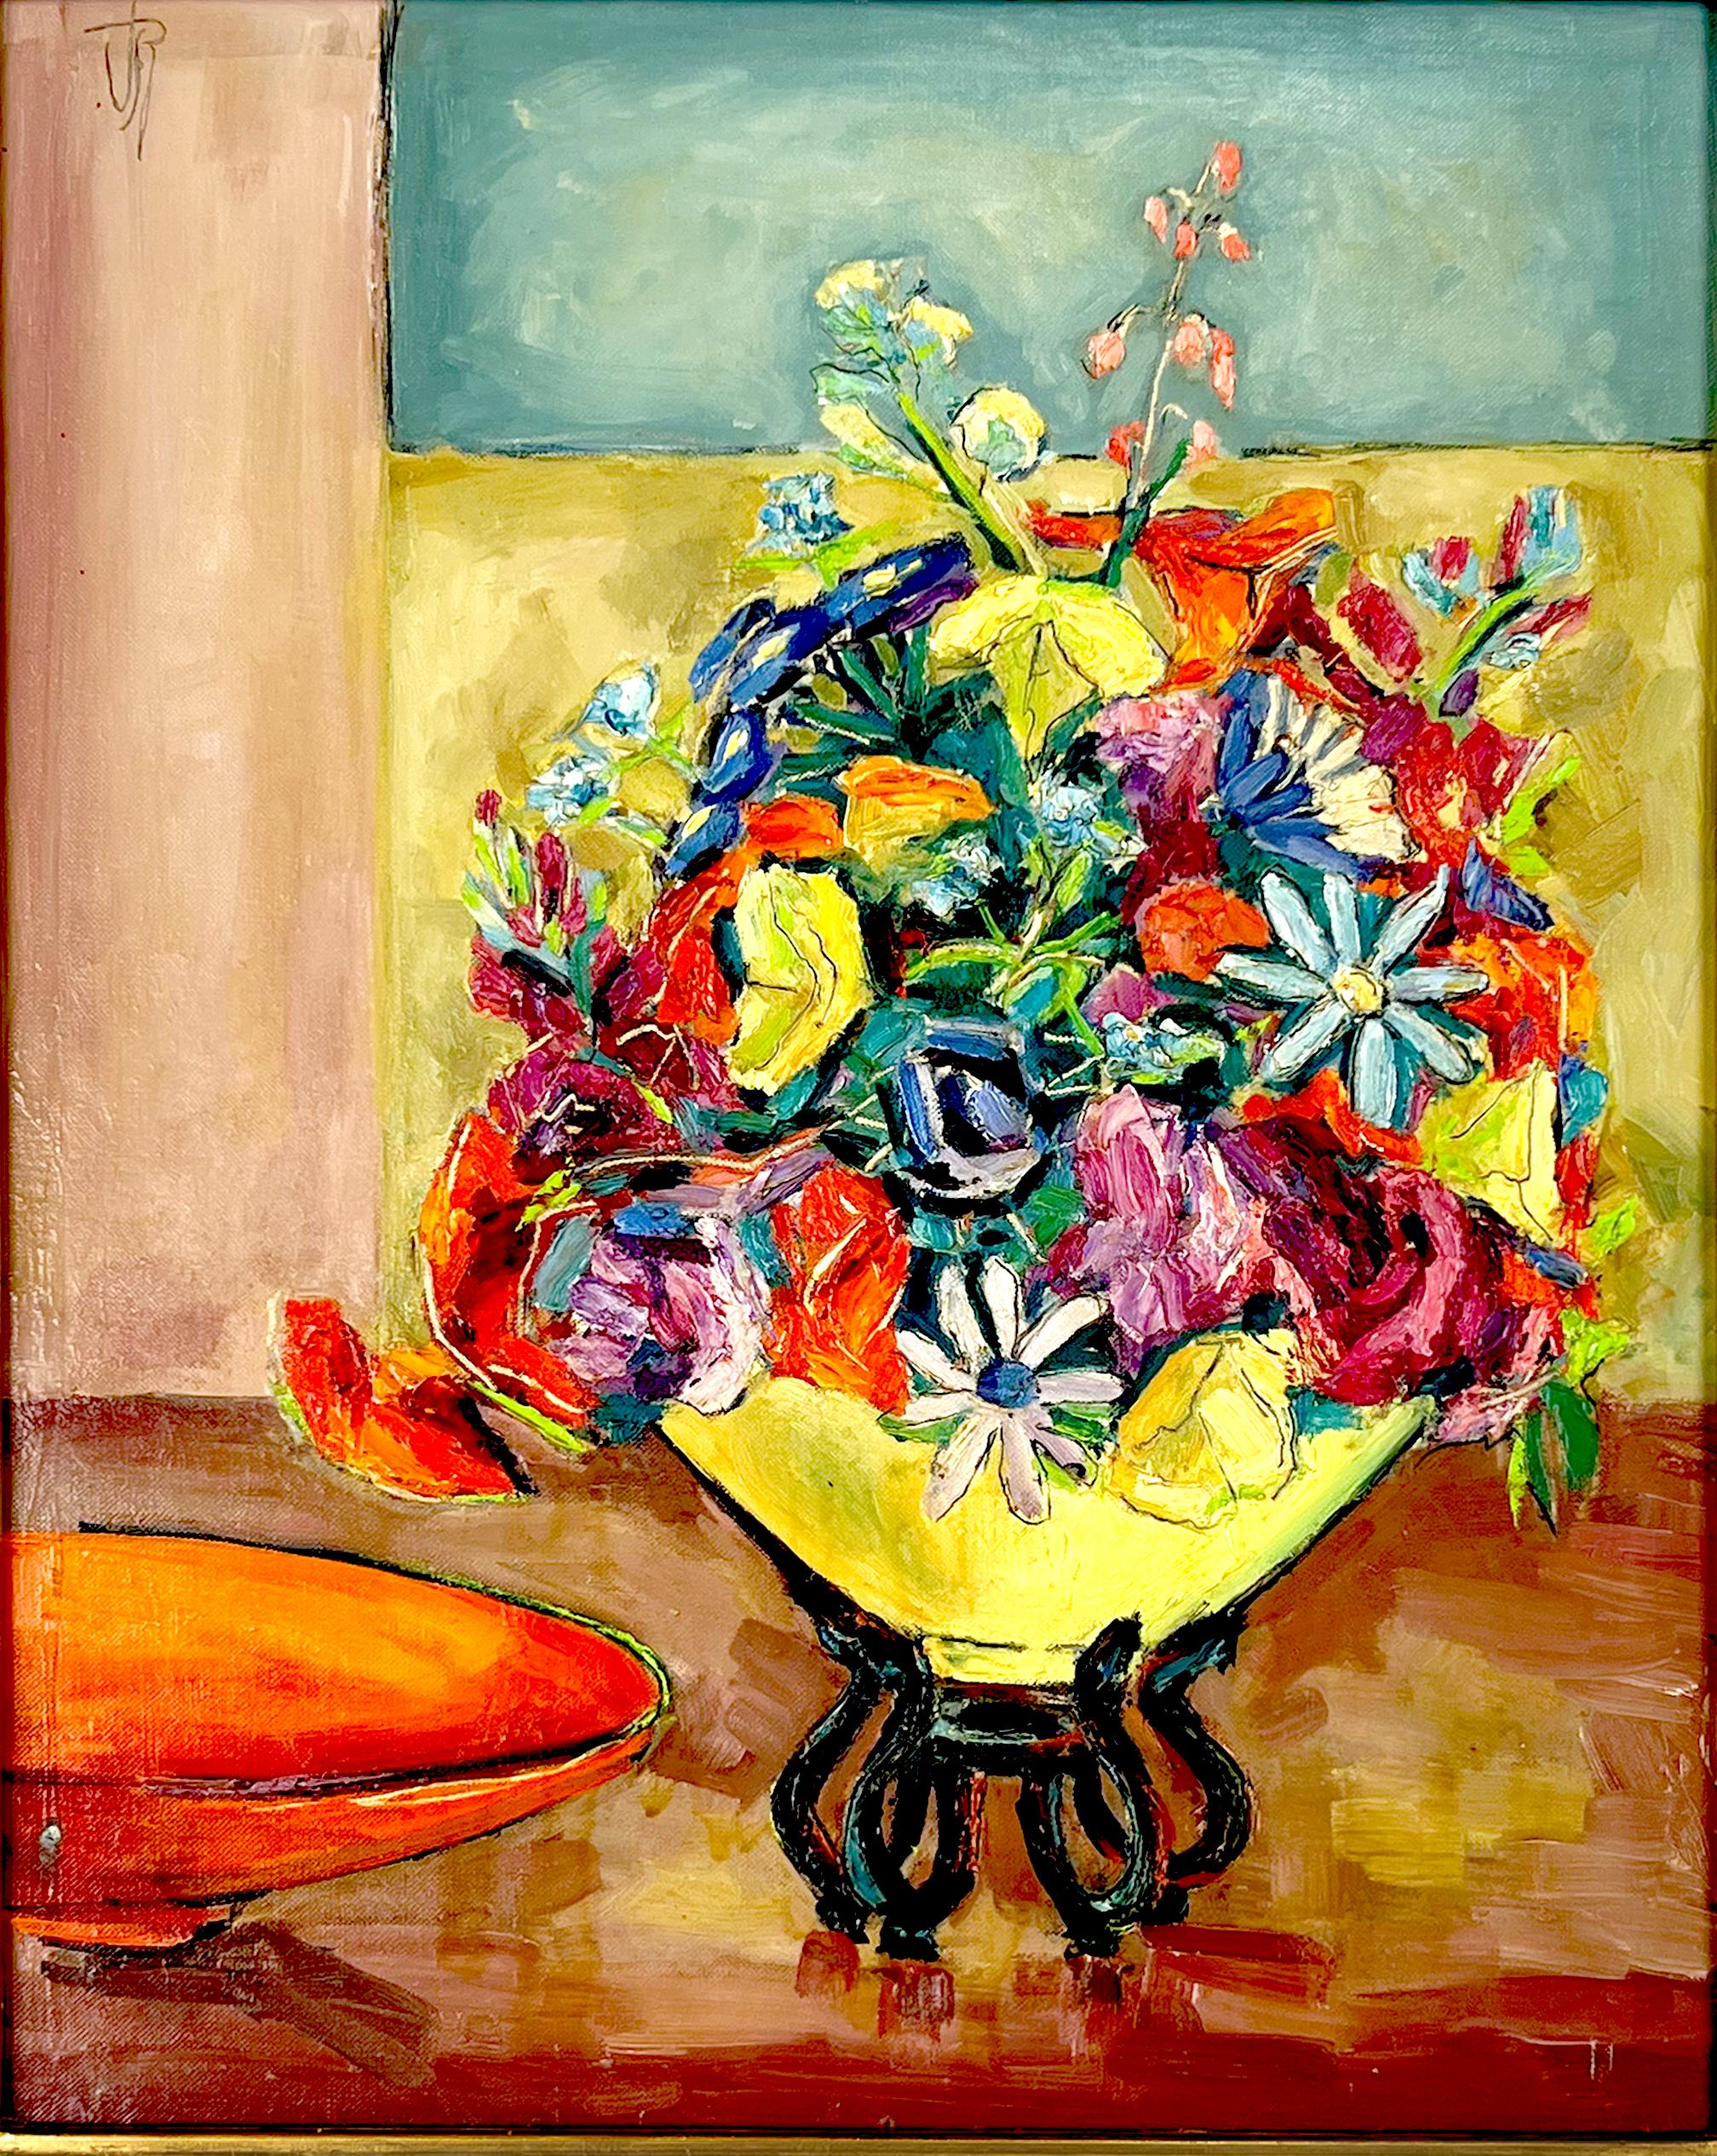 Mid-Century Modernist Multi-Color Bouquet, Yellow Vase of Flowers Still Life
Vivid and fun mid century modern still-life of a yellow vase of flowers by California artist Virginia Sevier Rogers (American, 1917-2015). A CAL Berkeley Modernist painter.